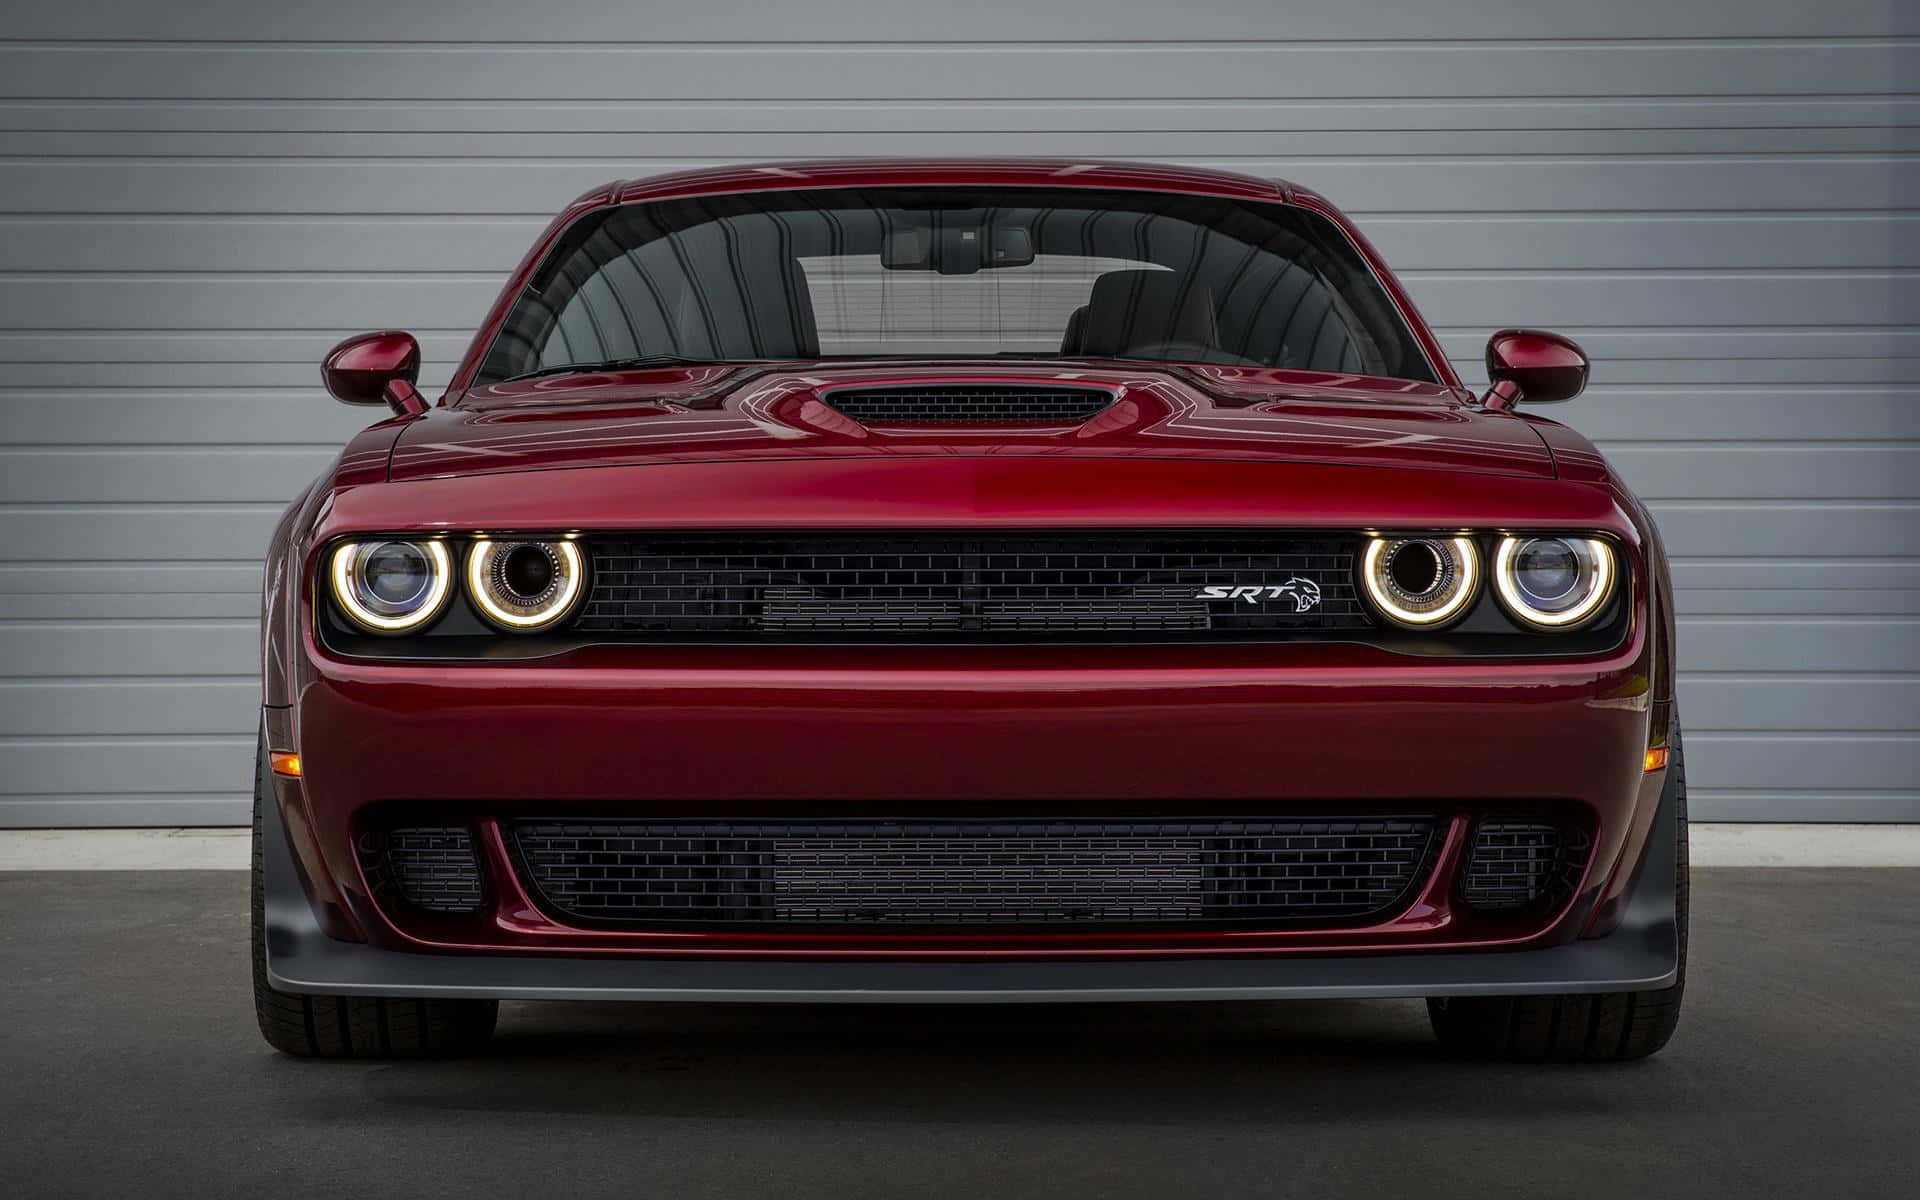 Red Dodge Challenger S R T Front View Wallpaper